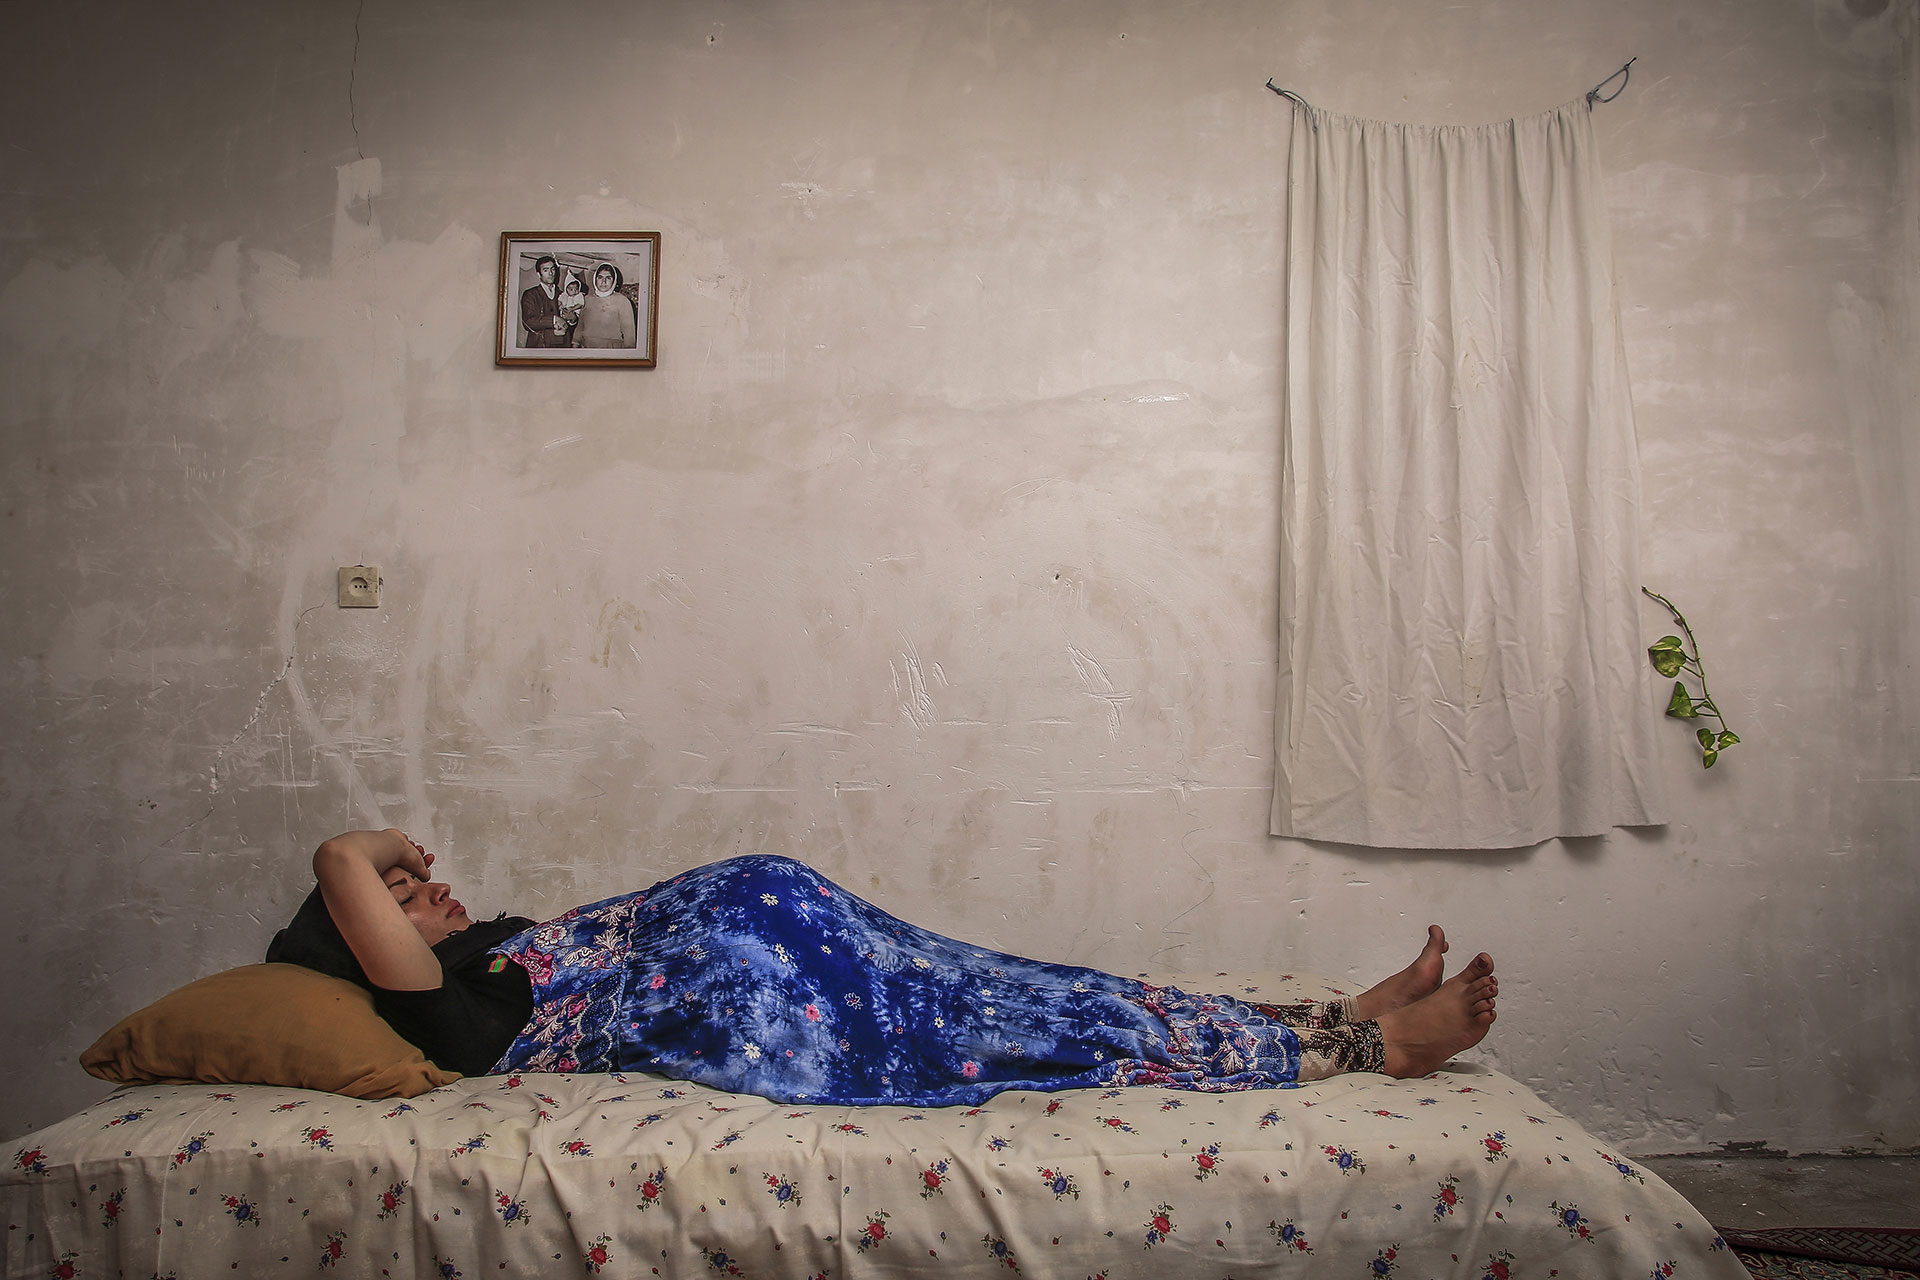 Zahra rests in her mother’s house during the last few months of her pregnancy.